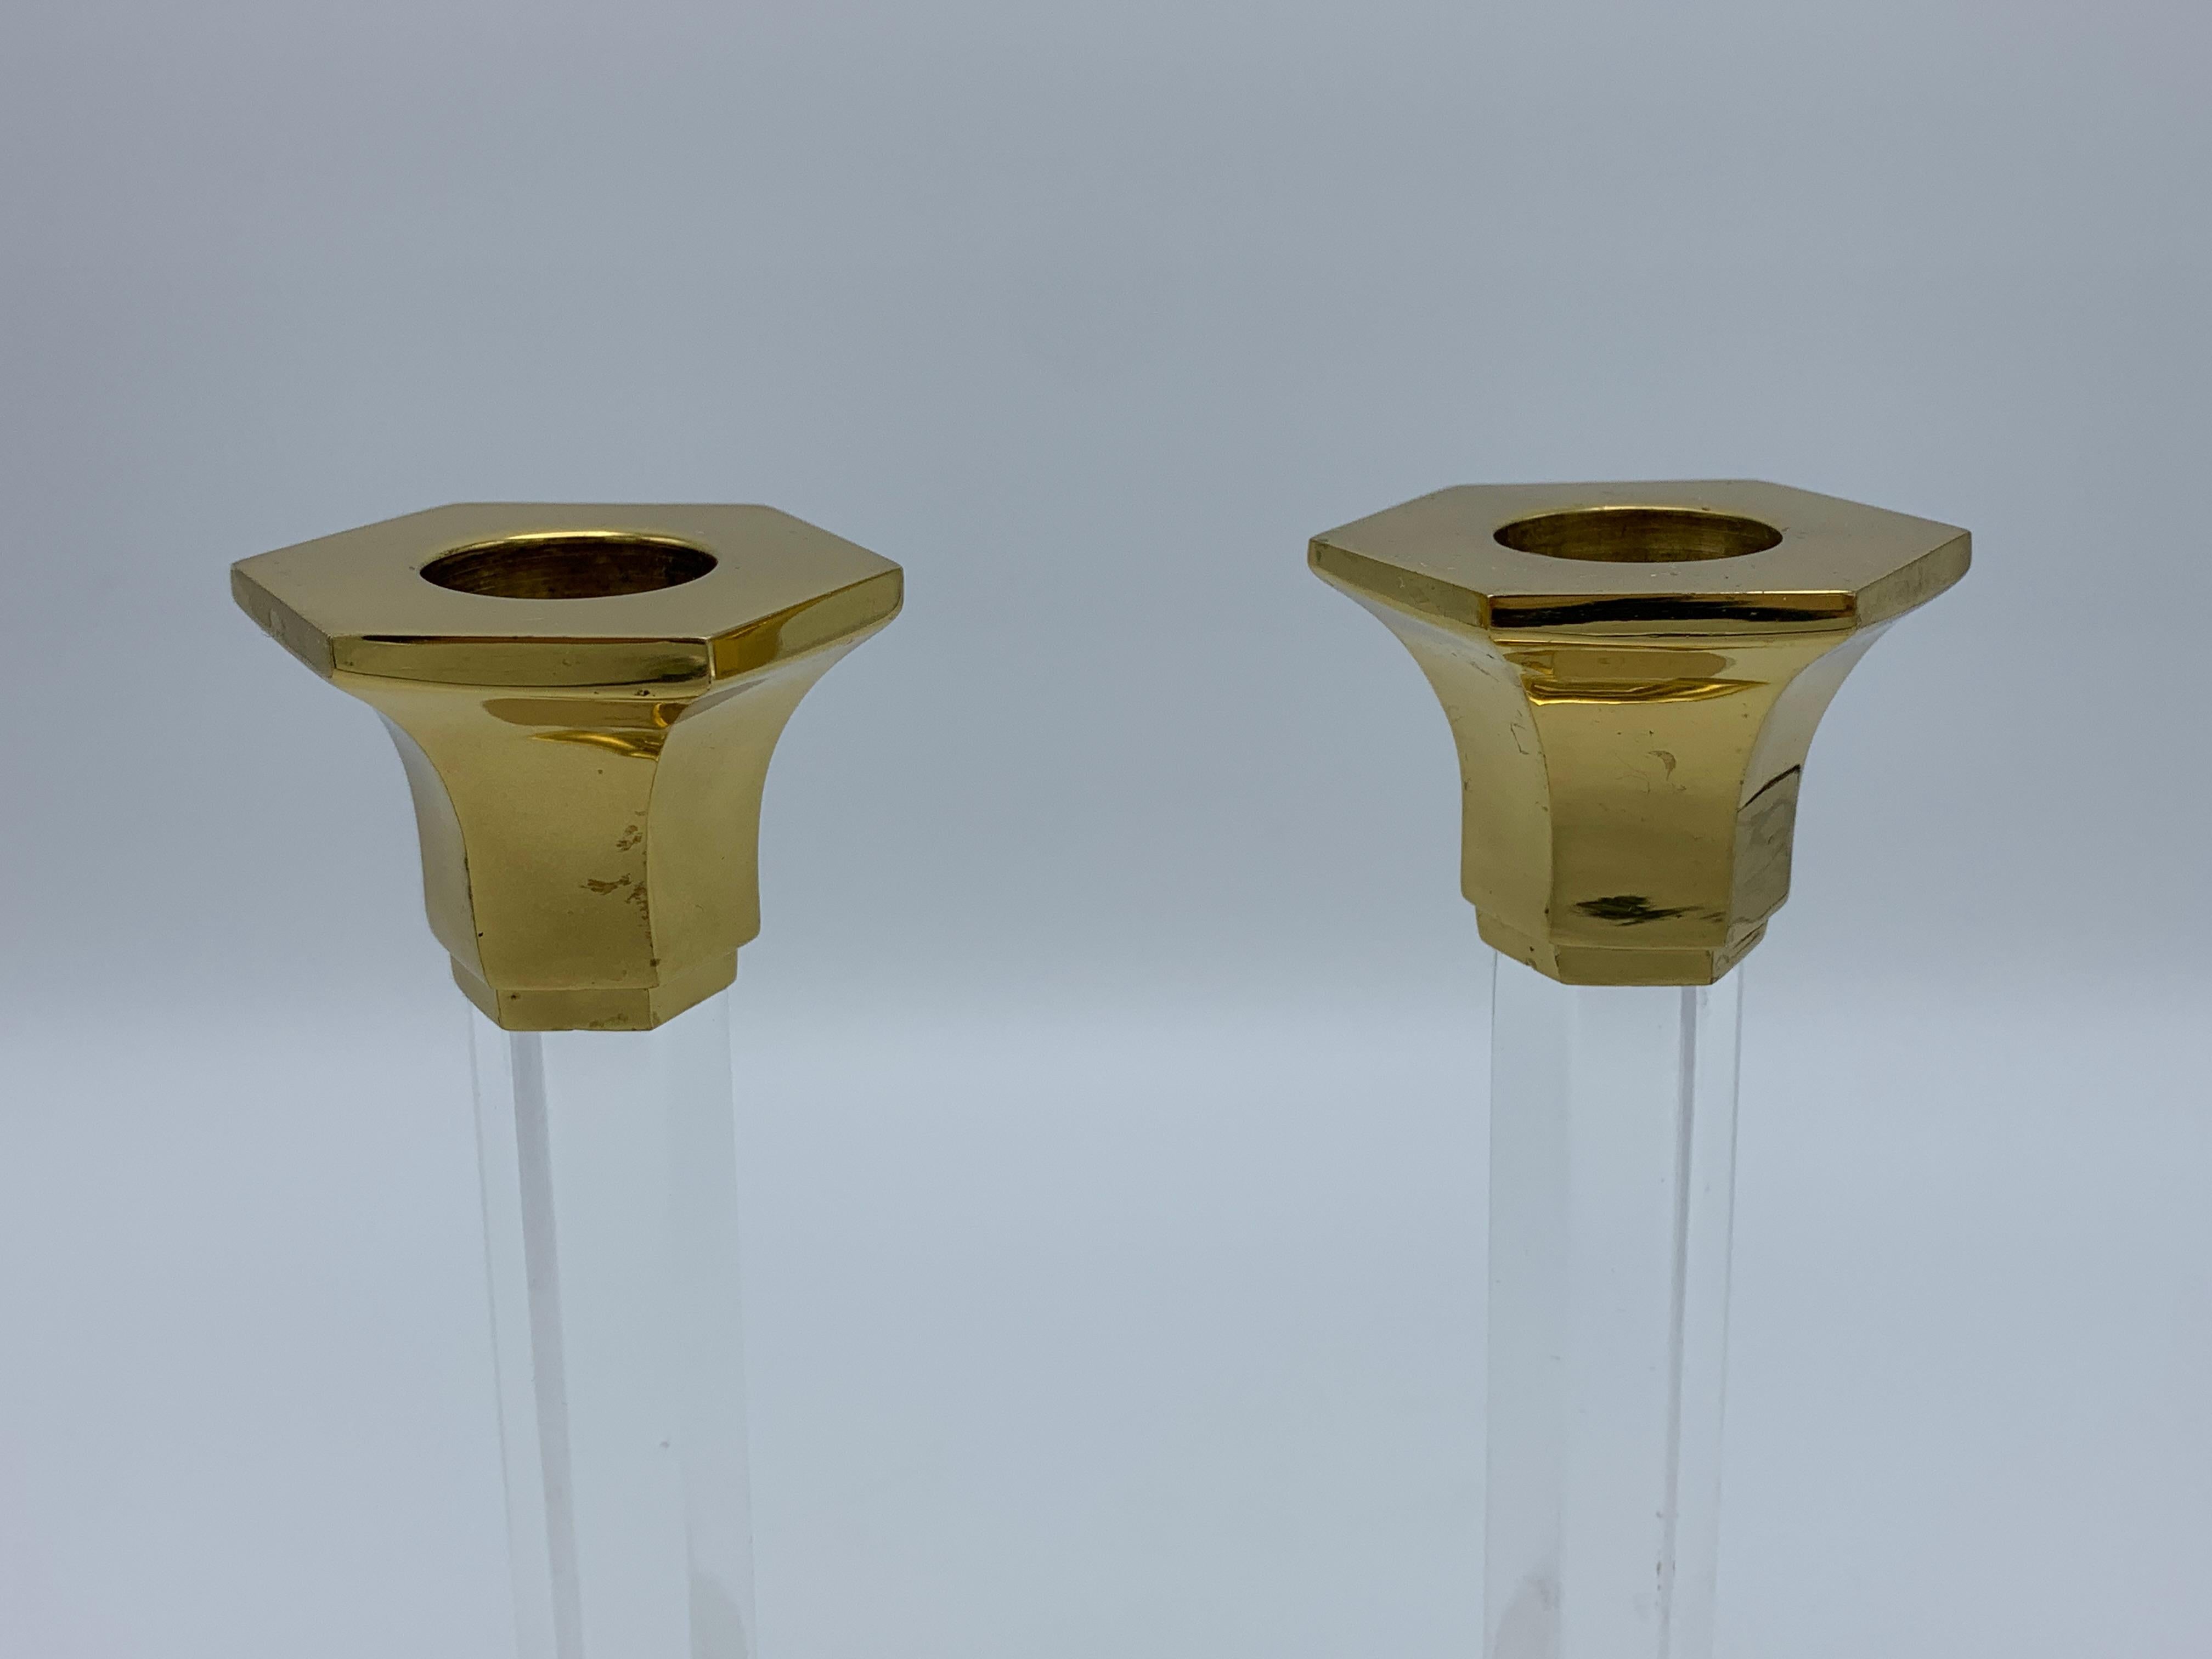 Listed is a stunning, pair of 1980s Charles Hollis Jones style candlestick holders. The pair have thick, lucite hexagon pillars with heavy polished brass bases and collars. Heavy, weighing nearly 2lbs/pair.